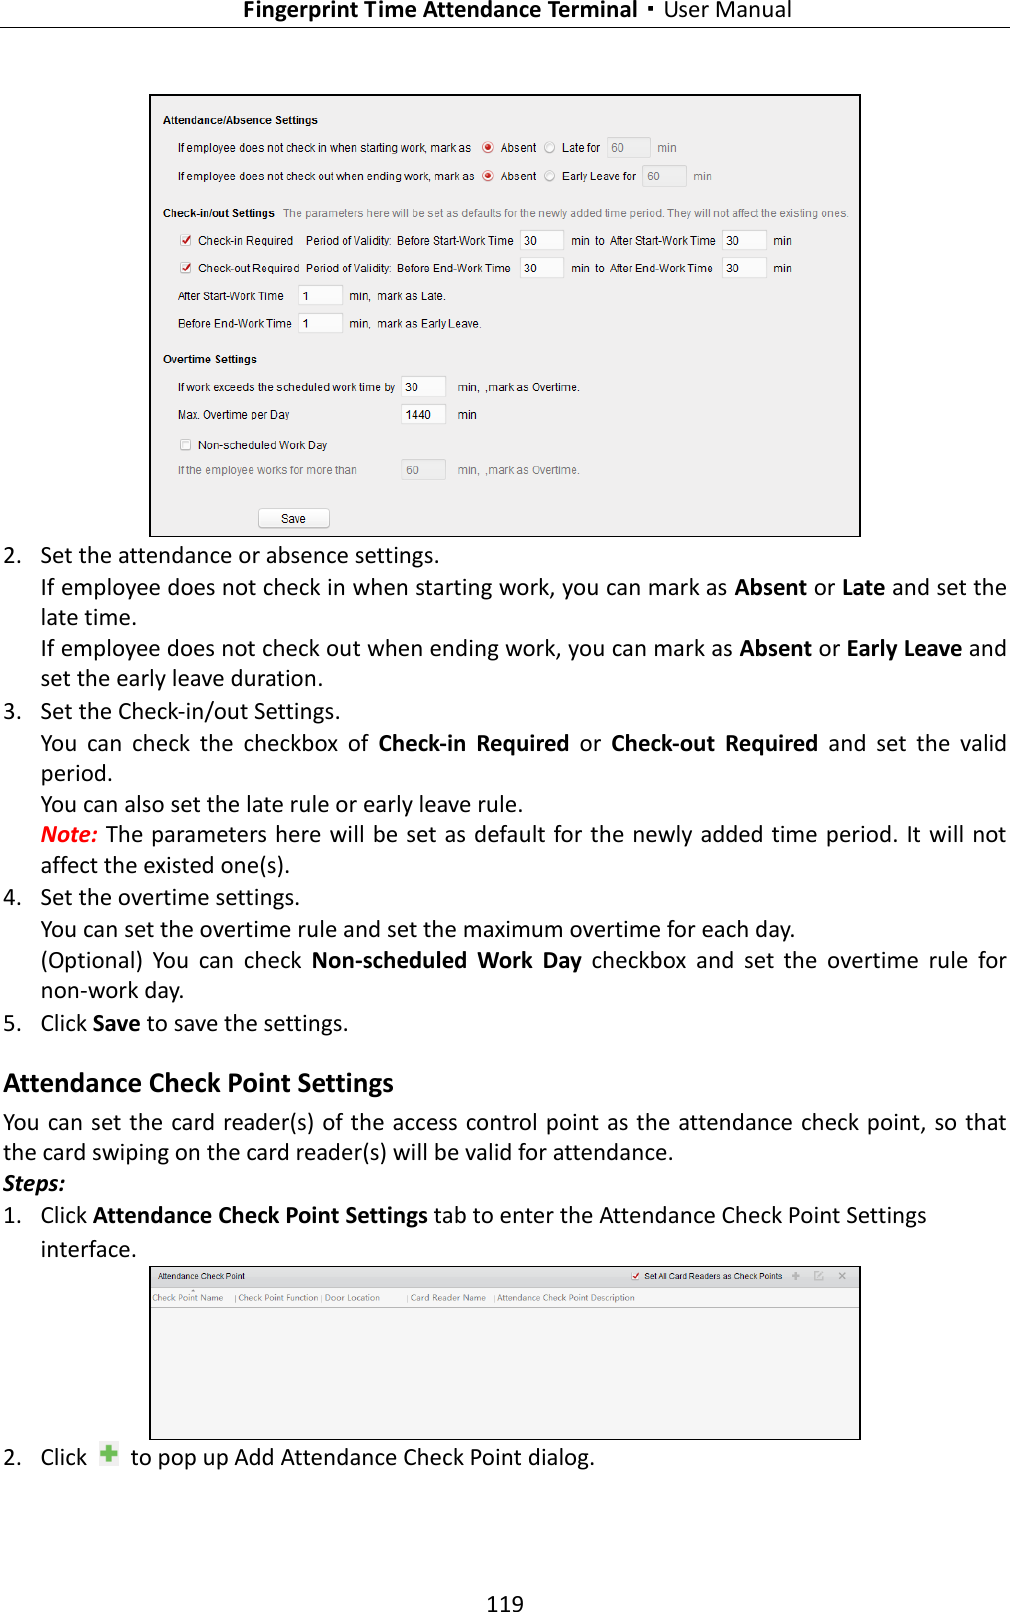   Fingerprint Time Attendance Terminal·User Manual 119    2. Set the attendance or absence settings. If employee does not check in when starting work, you can mark as Absent or Late and set the late time. If employee does not check out when ending work, you can mark as Absent or Early Leave and set the early leave duration.  3. Set the Check-in/out Settings. You  can  check  the  checkbox  of  Check-in  Required  or  Check-out  Required  and  set  the  valid period. You can also set the late rule or early leave rule.   Note: The parameters here will be set as default for the newly added time period. It will not affect the existed one(s). 4. Set the overtime settings. You can set the overtime rule and set the maximum overtime for each day. (Optional)  You  can  check  Non-scheduled  Work  Day  checkbox  and  set  the  overtime  rule  for non-work day. 5. Click Save to save the settings. Attendance Check Point Settings You can set the card reader(s) of the access control point as the attendance check point, so that the card swiping on the card reader(s) will be valid for attendance. Steps: 1. Click Attendance Check Point Settings tab to enter the Attendance Check Point Settings interface.  2. Click    to pop up Add Attendance Check Point dialog. 